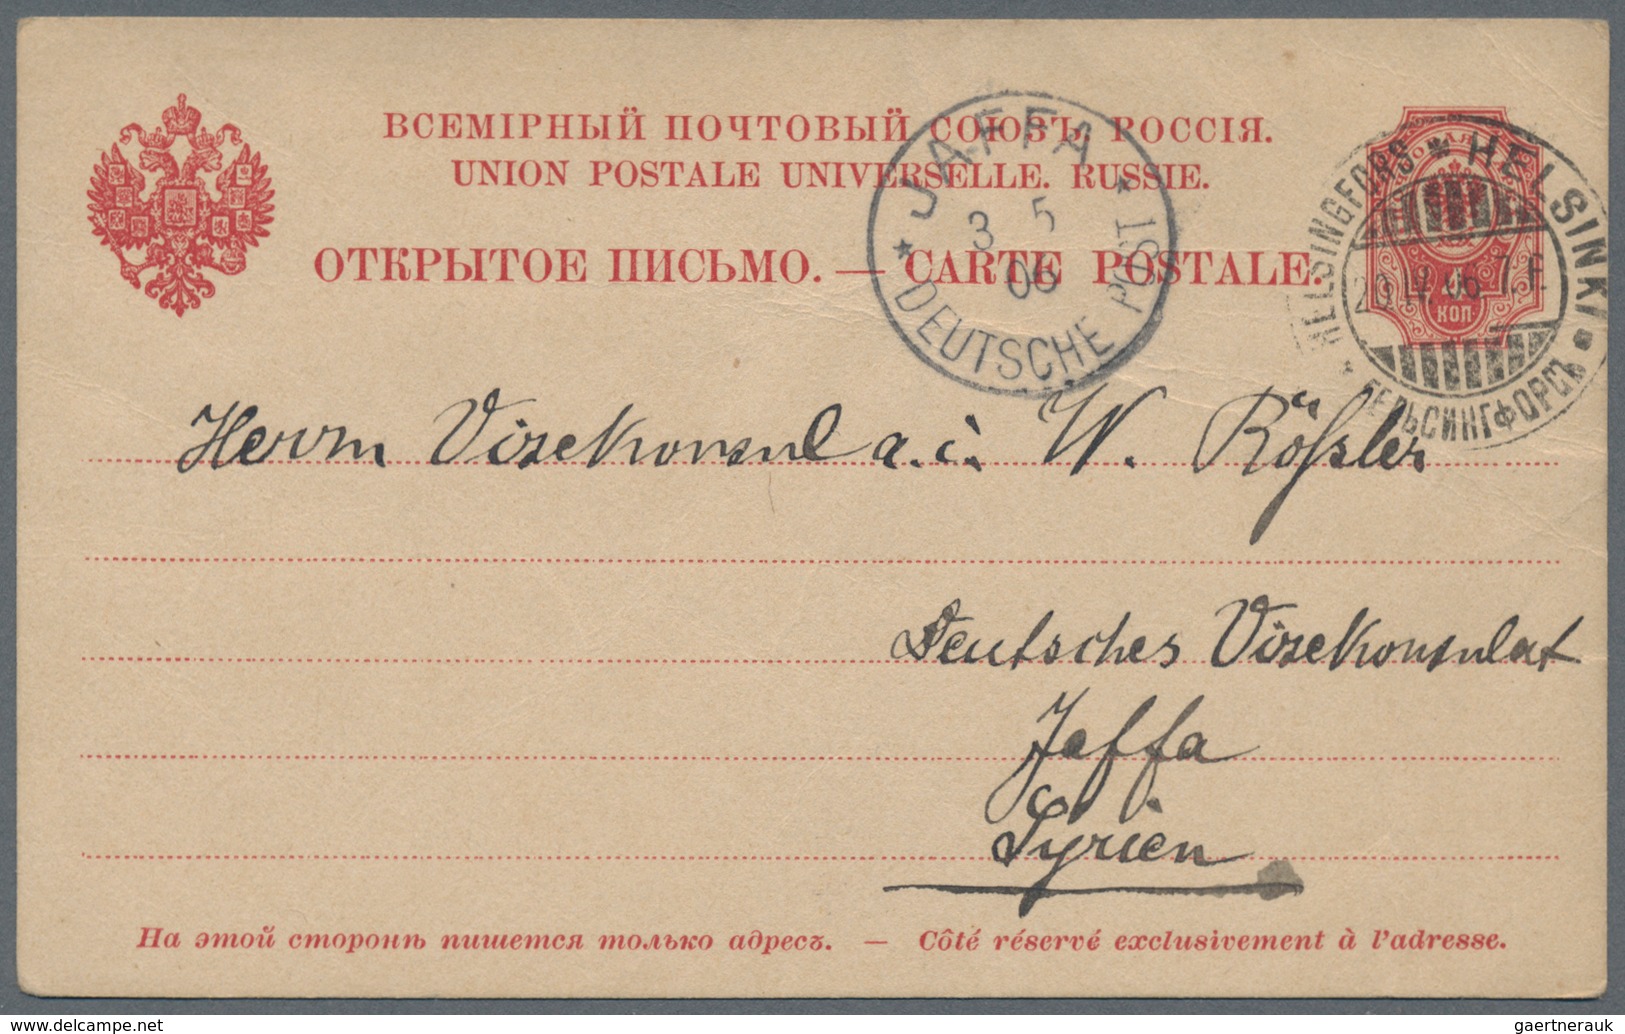 Russland: 1863/1924, holding of ca. 120 letters, some parcel cards, postcards (incl. by registered m